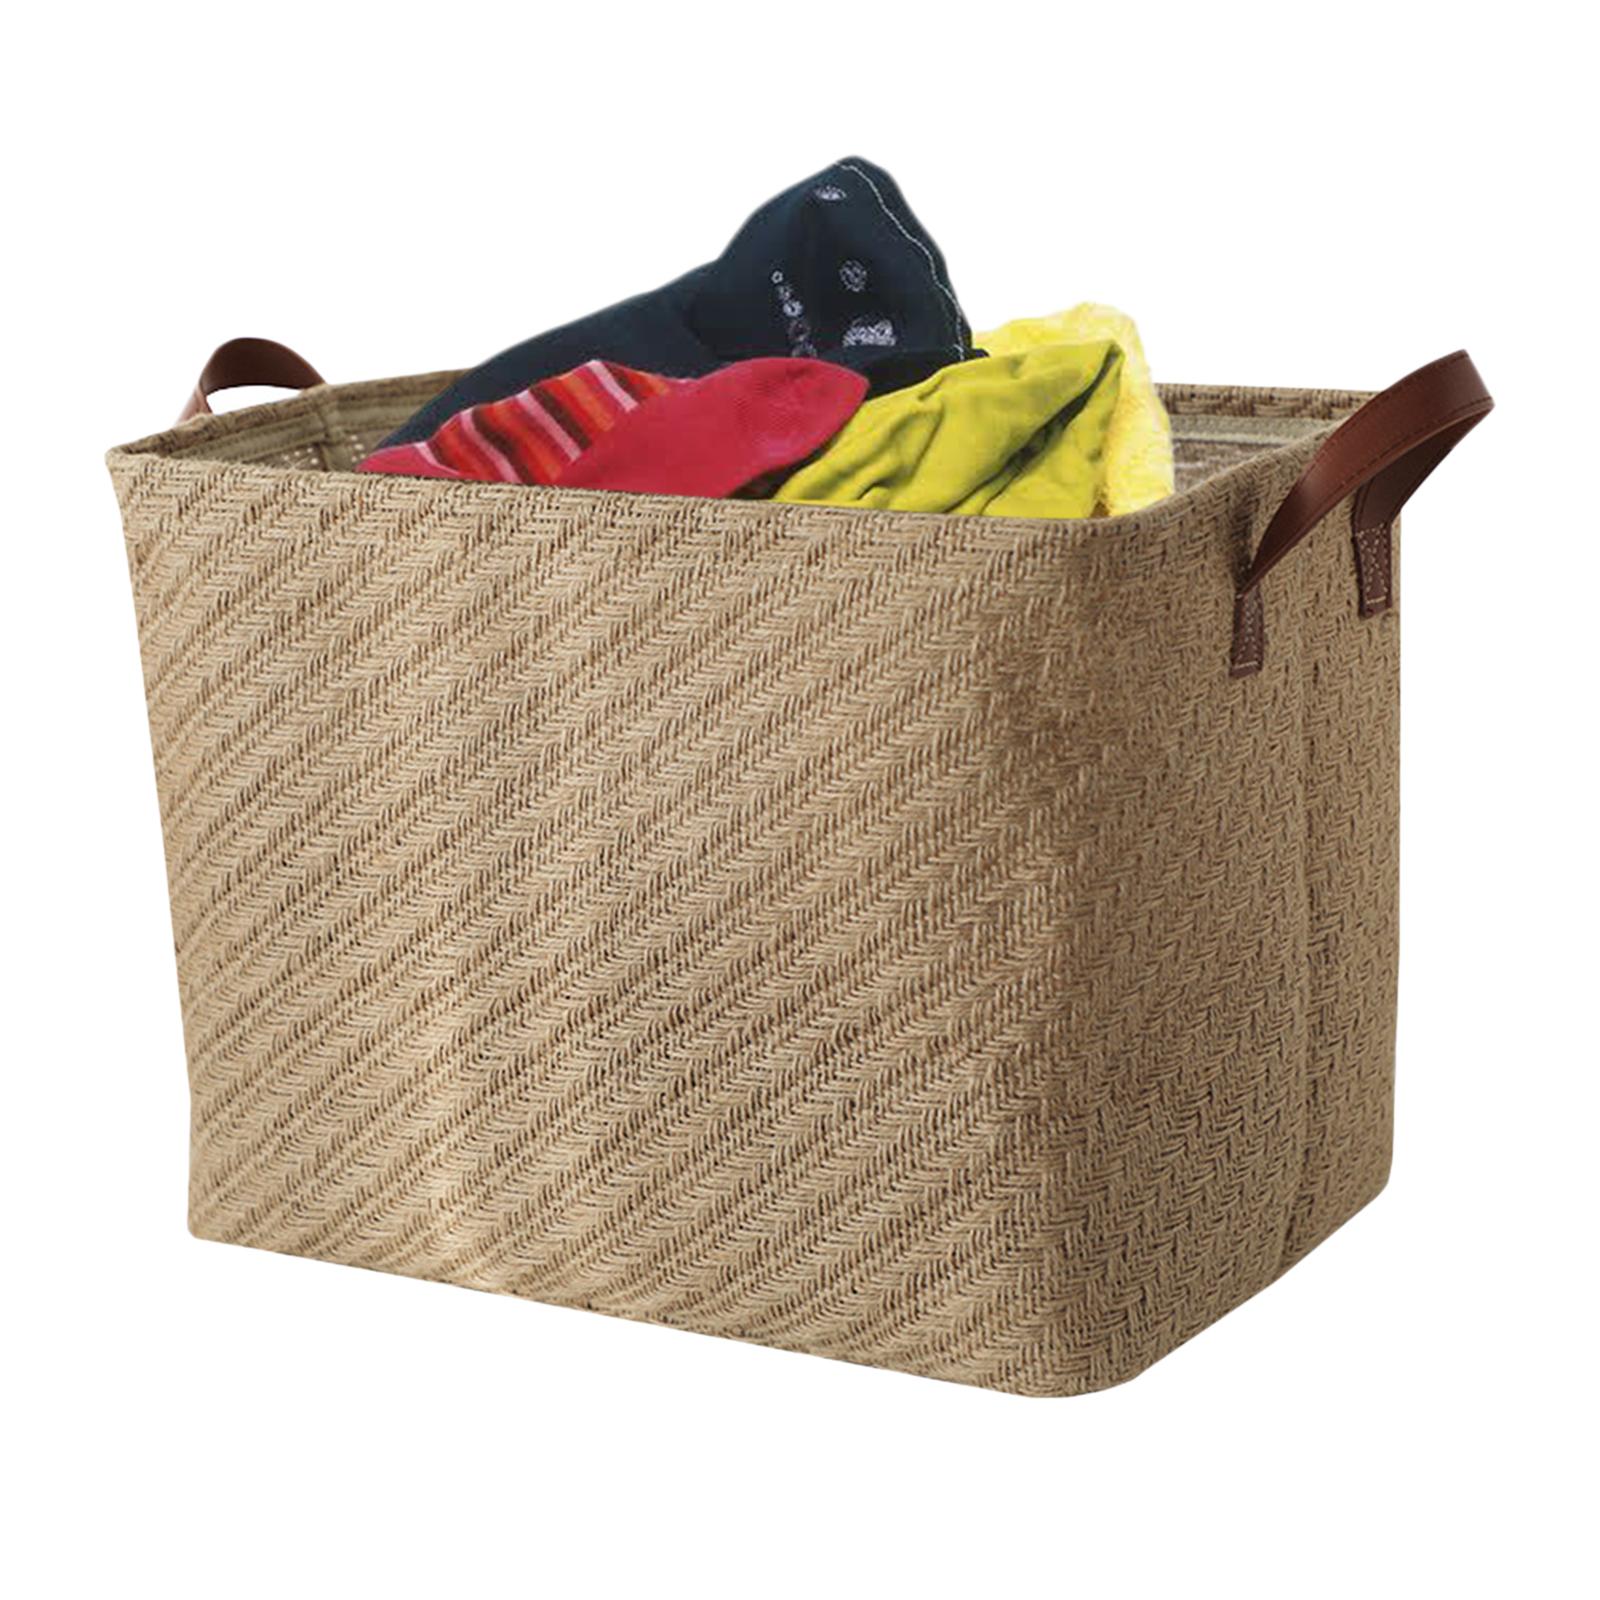 Foldable Storage Basket with Handles for Clothes Towels Laundry Storage Bin Rough Weave